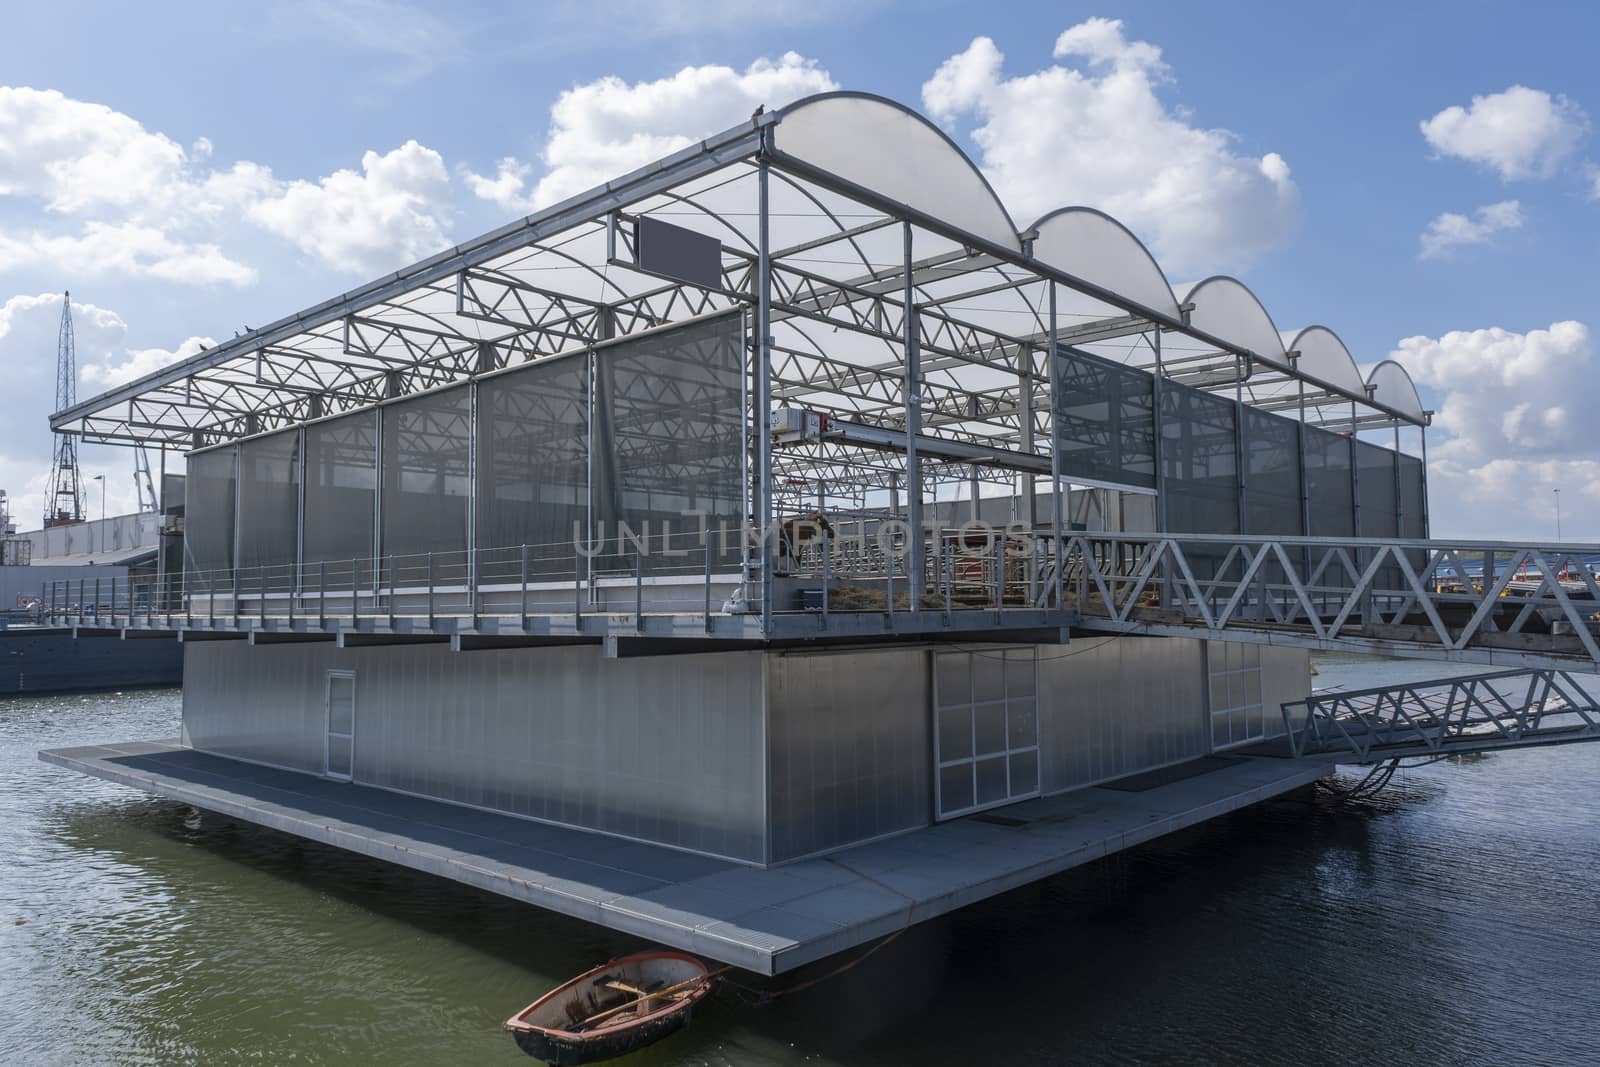 Floating Farm. The first floating farm in the world was realized by Tjeerdkruse